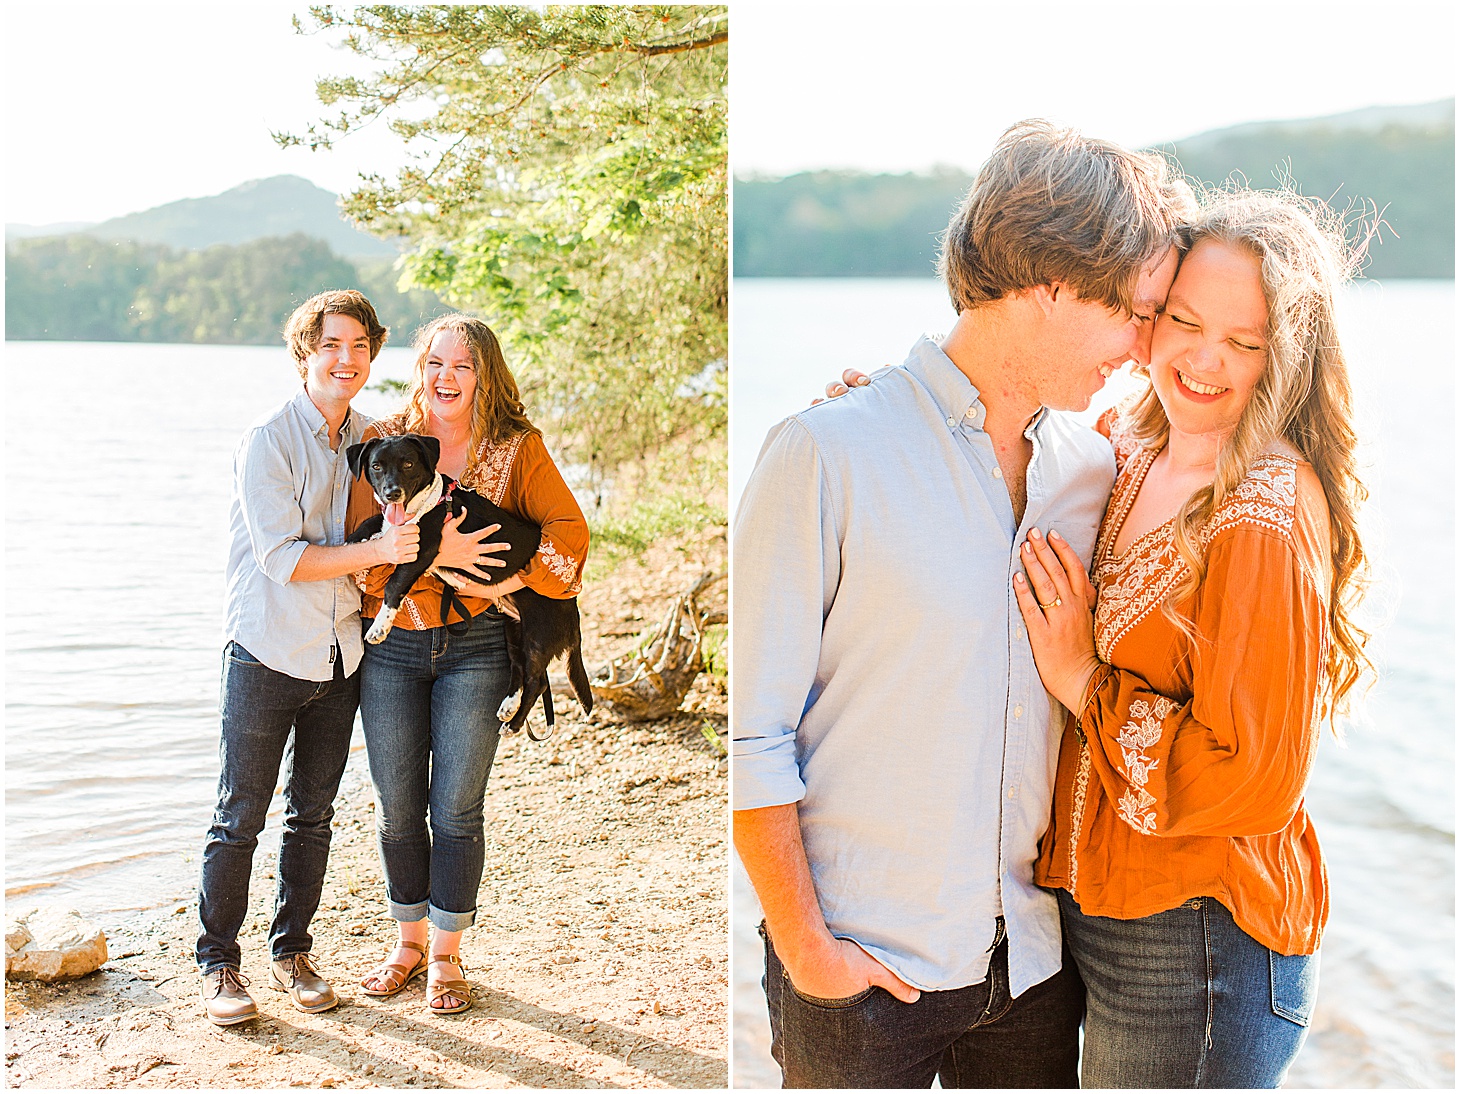 carvinscoveengagementsession_roanokeengagementsession_carvinscove_virginiawedding_virginiaweddingphotographer_vaweddingphotographer_photo_0014.jpg